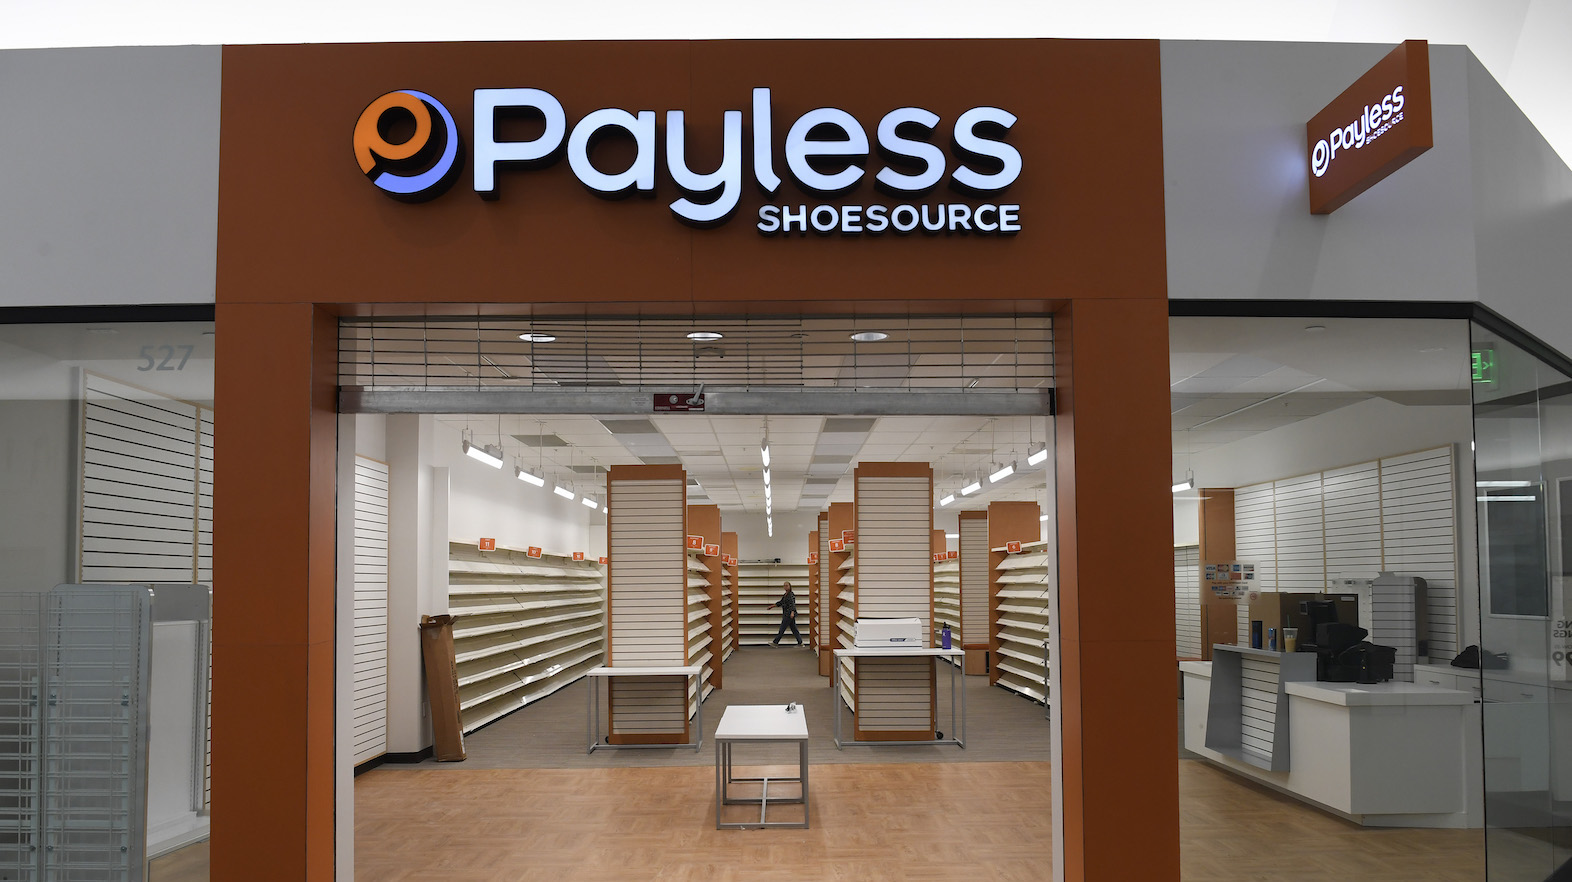 Payless Shoes Discount Deals - anuariocidob.org 1688786410